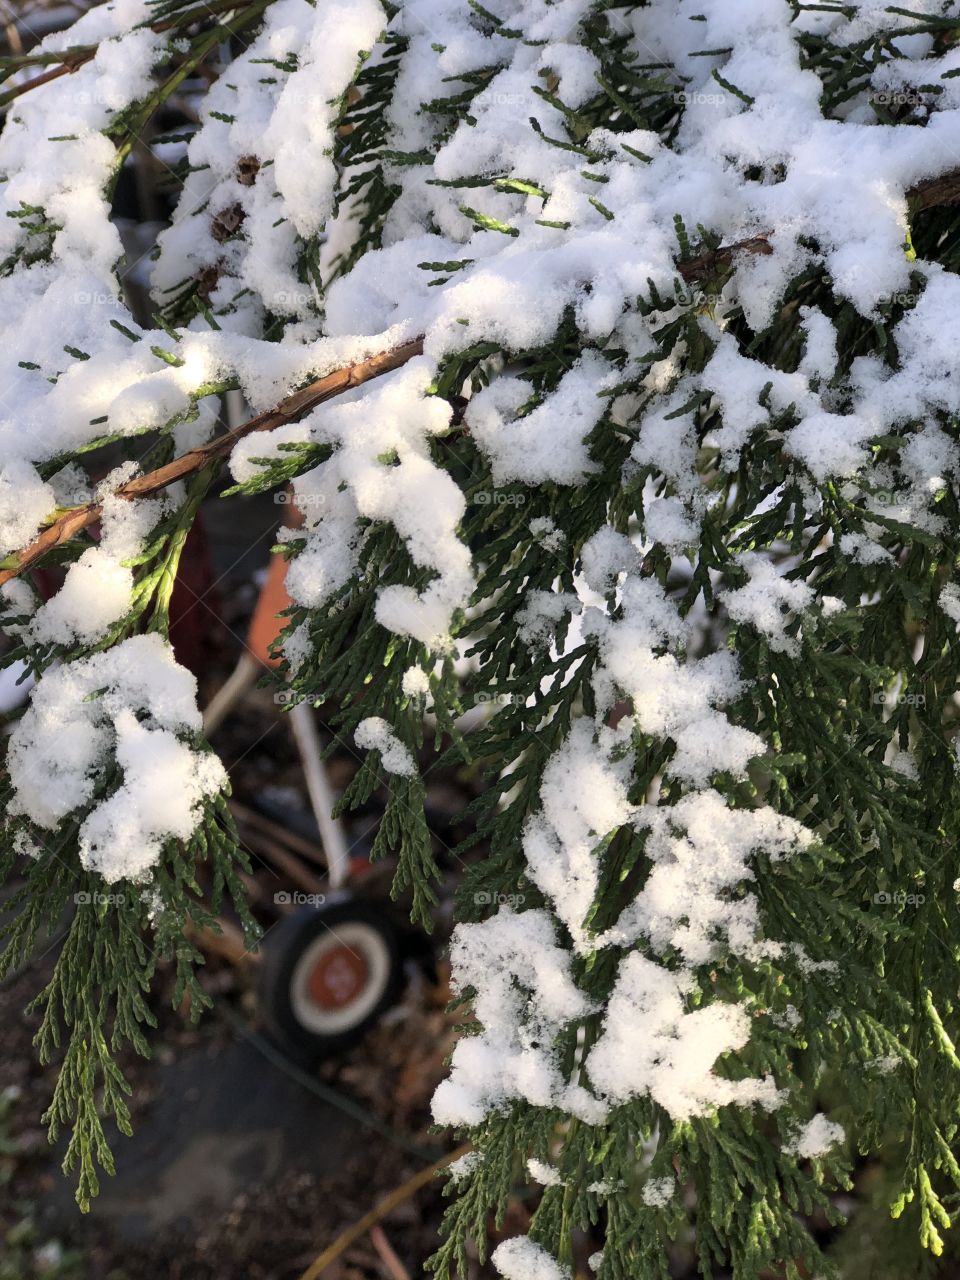 An old mower that been left out in the snow through a snow covered pine tree 